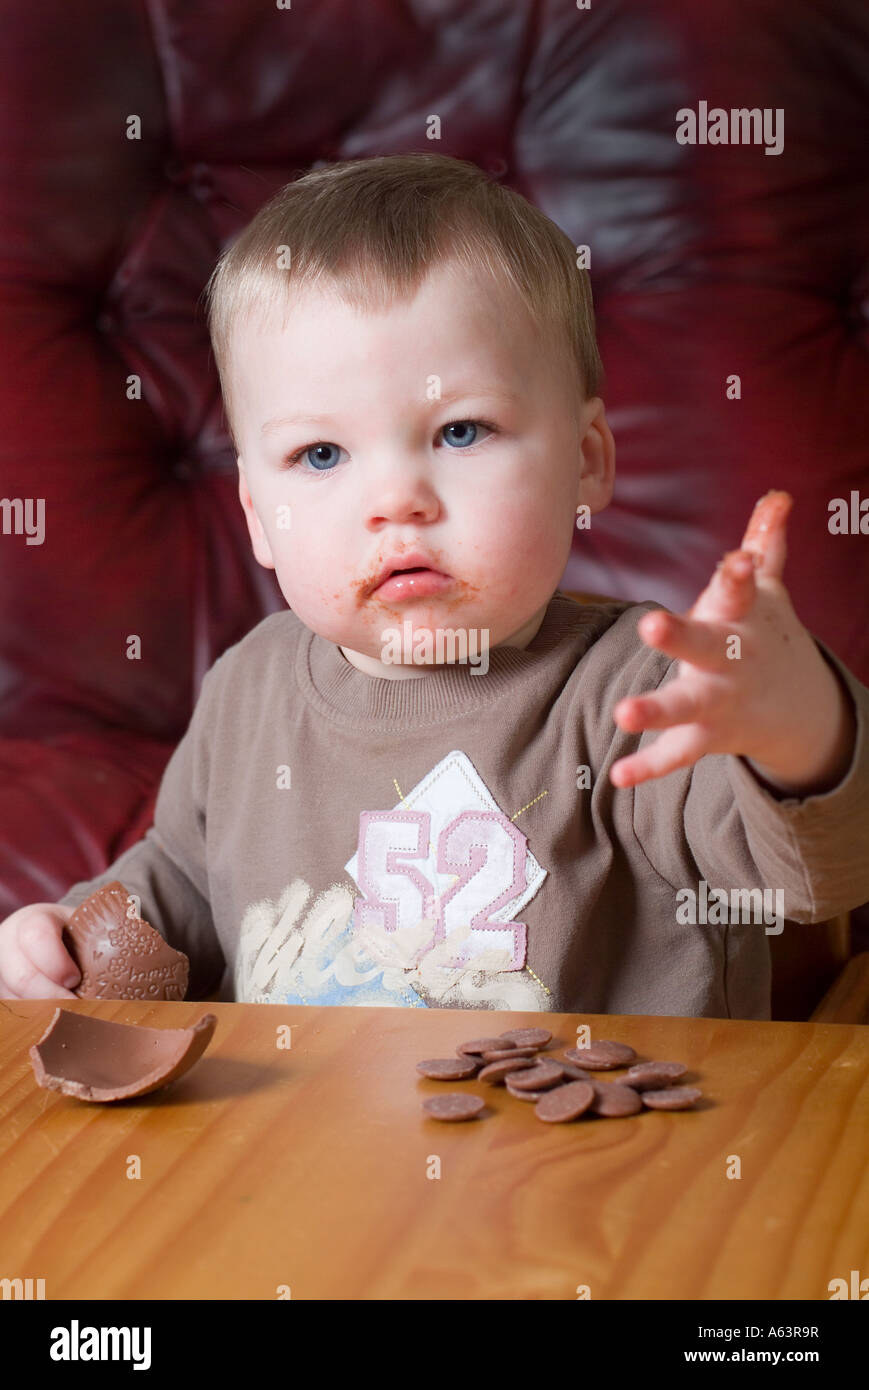 2 year old boy eating at home Stock Photo